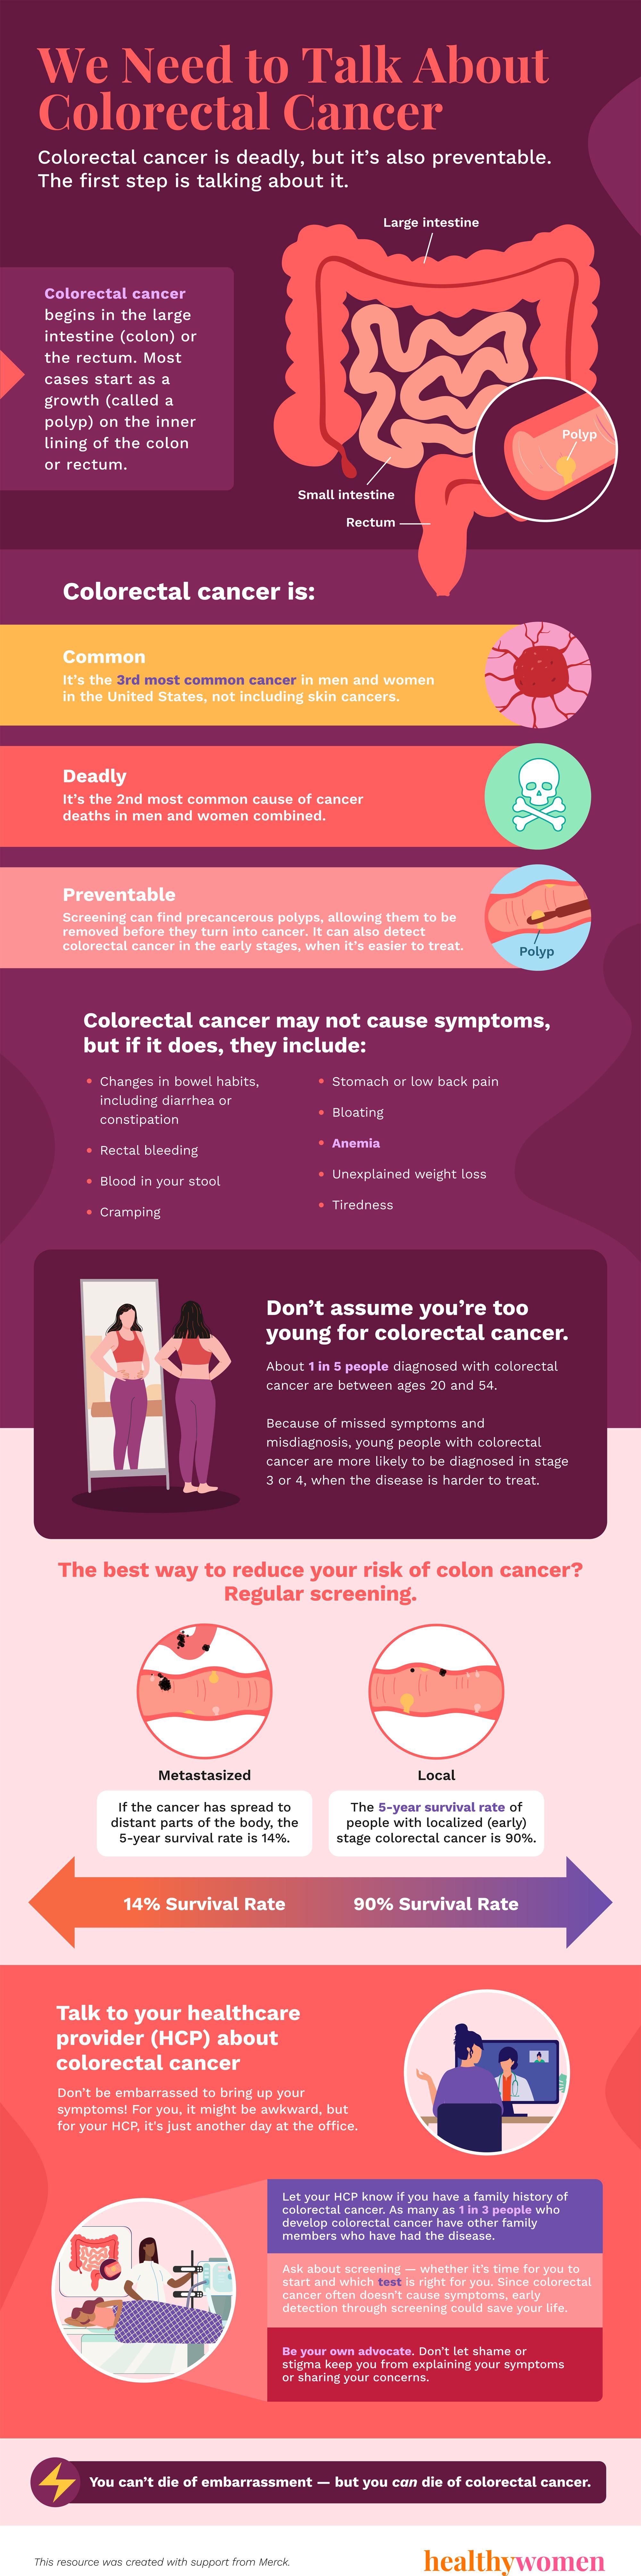 Infographic We Need to Talk About Colorectal Cancer. Click the image to open the PDF